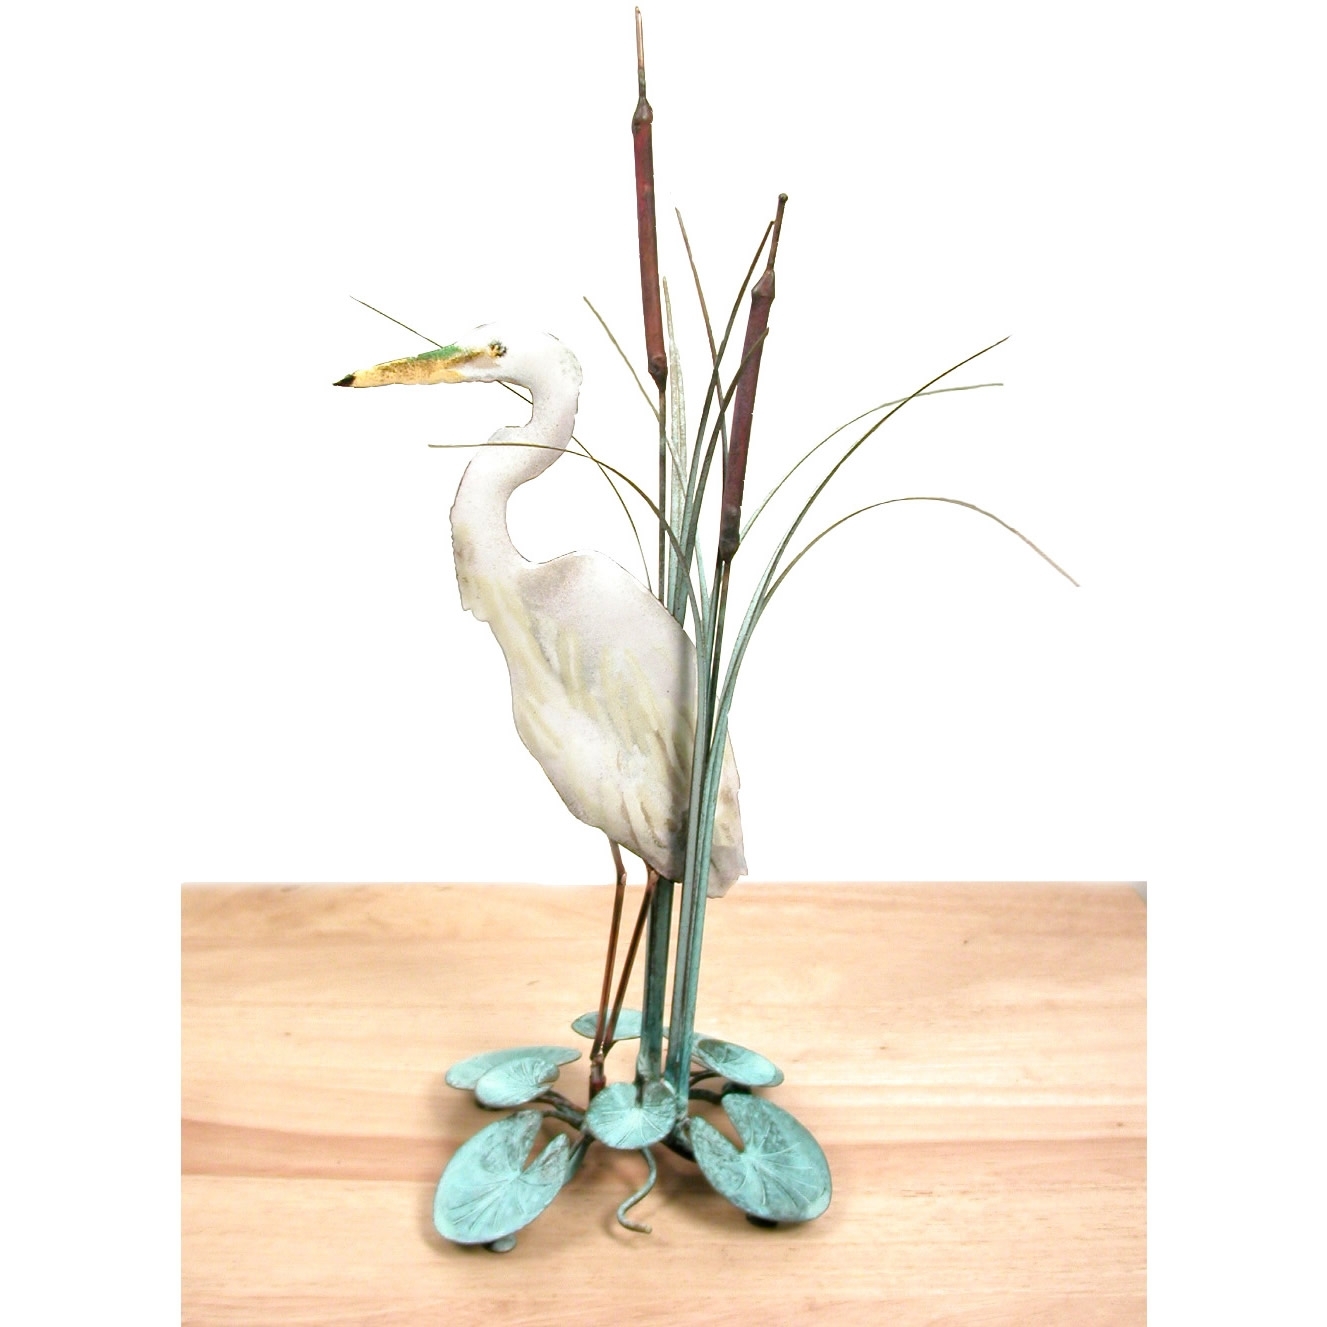 Snowy Egret Bird with Shells Metal Wall Art Sculpture Bovano of Cheshire #W368 